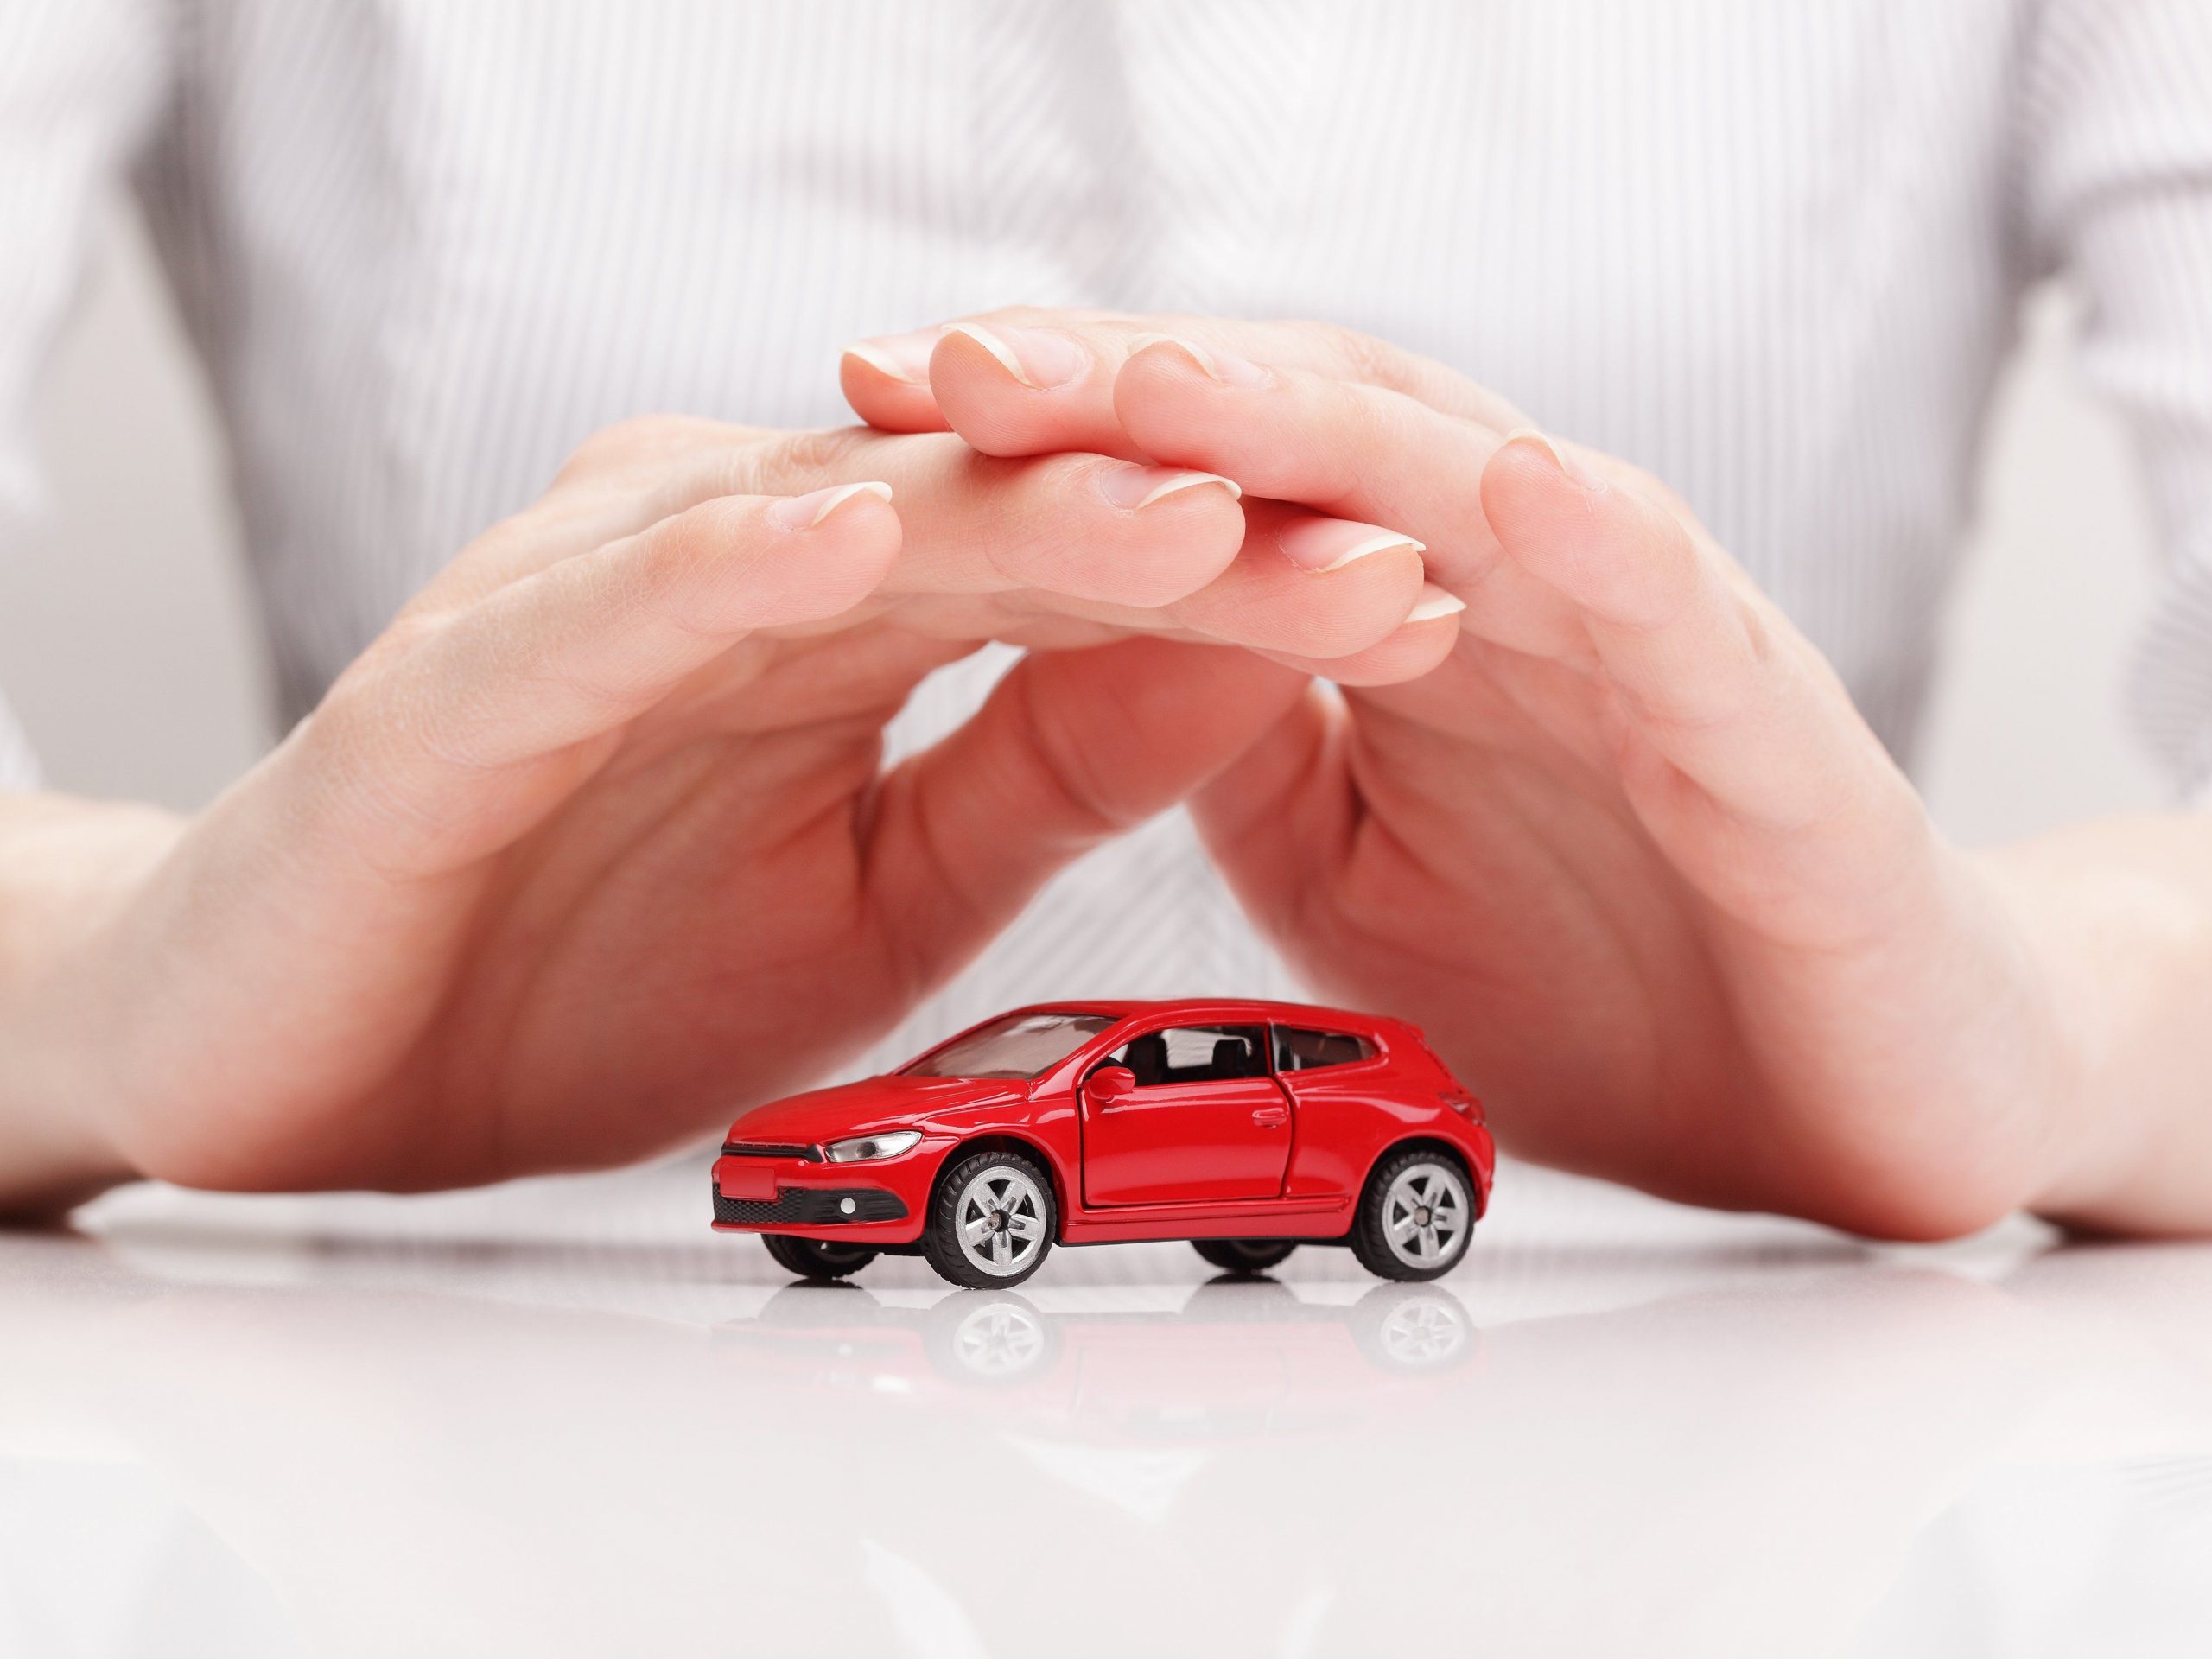 Reliable And Trustworthy Auto Insurance Near Me According To inside measurements 3800 X 2850